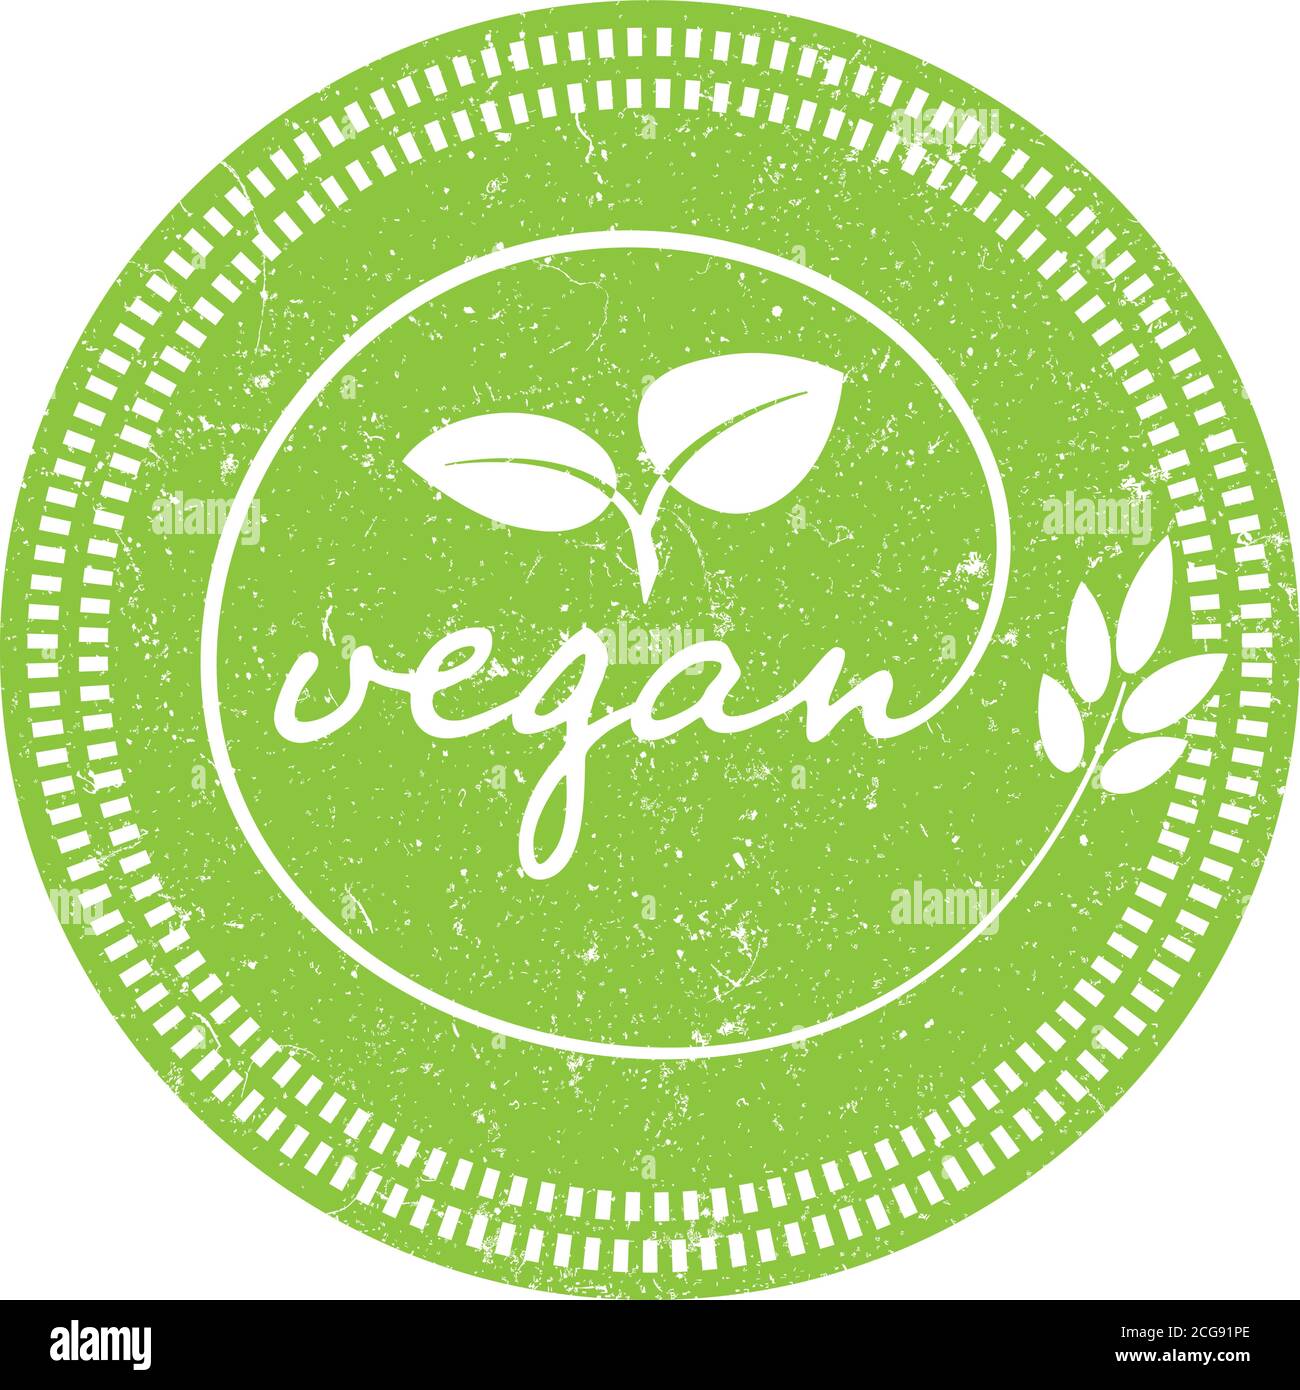 grungy green round VEGAN label or stamp vector illustration Stock Vector